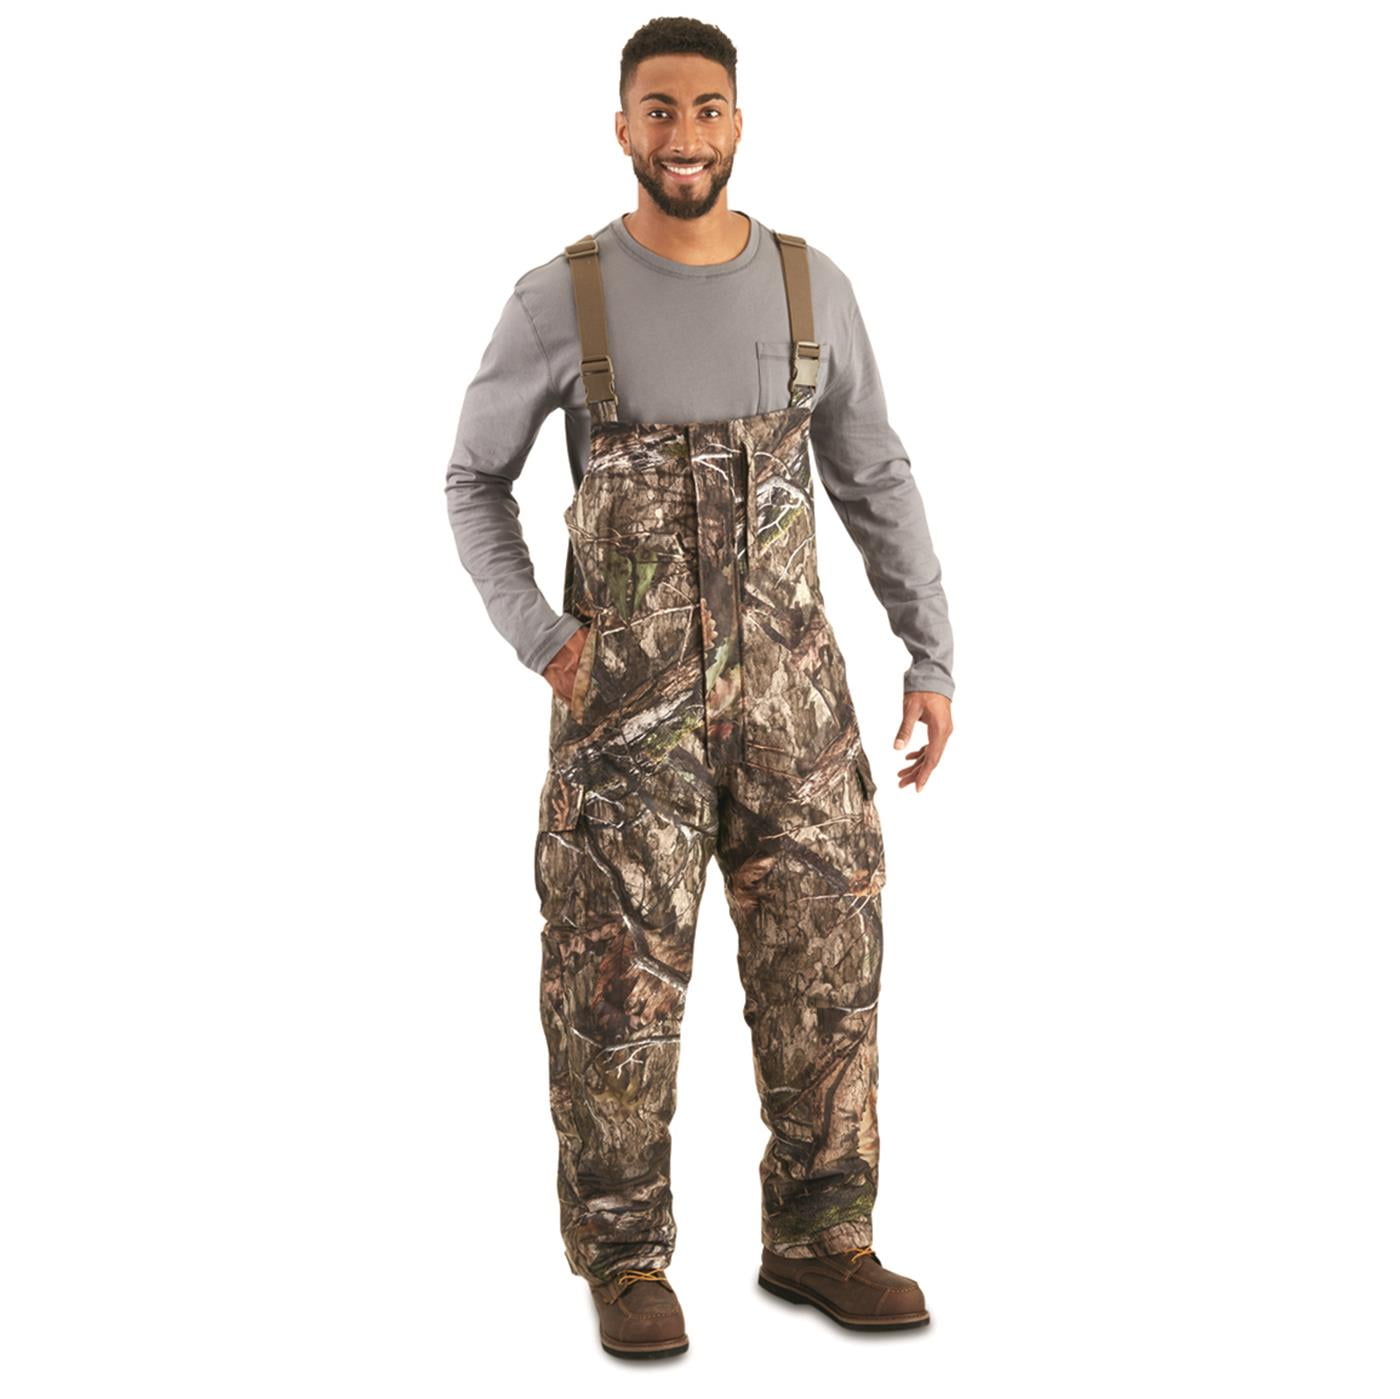 Guide Gear Steadfast Men's Hunting Bibs Camouflage, 150 gram Insulated ...